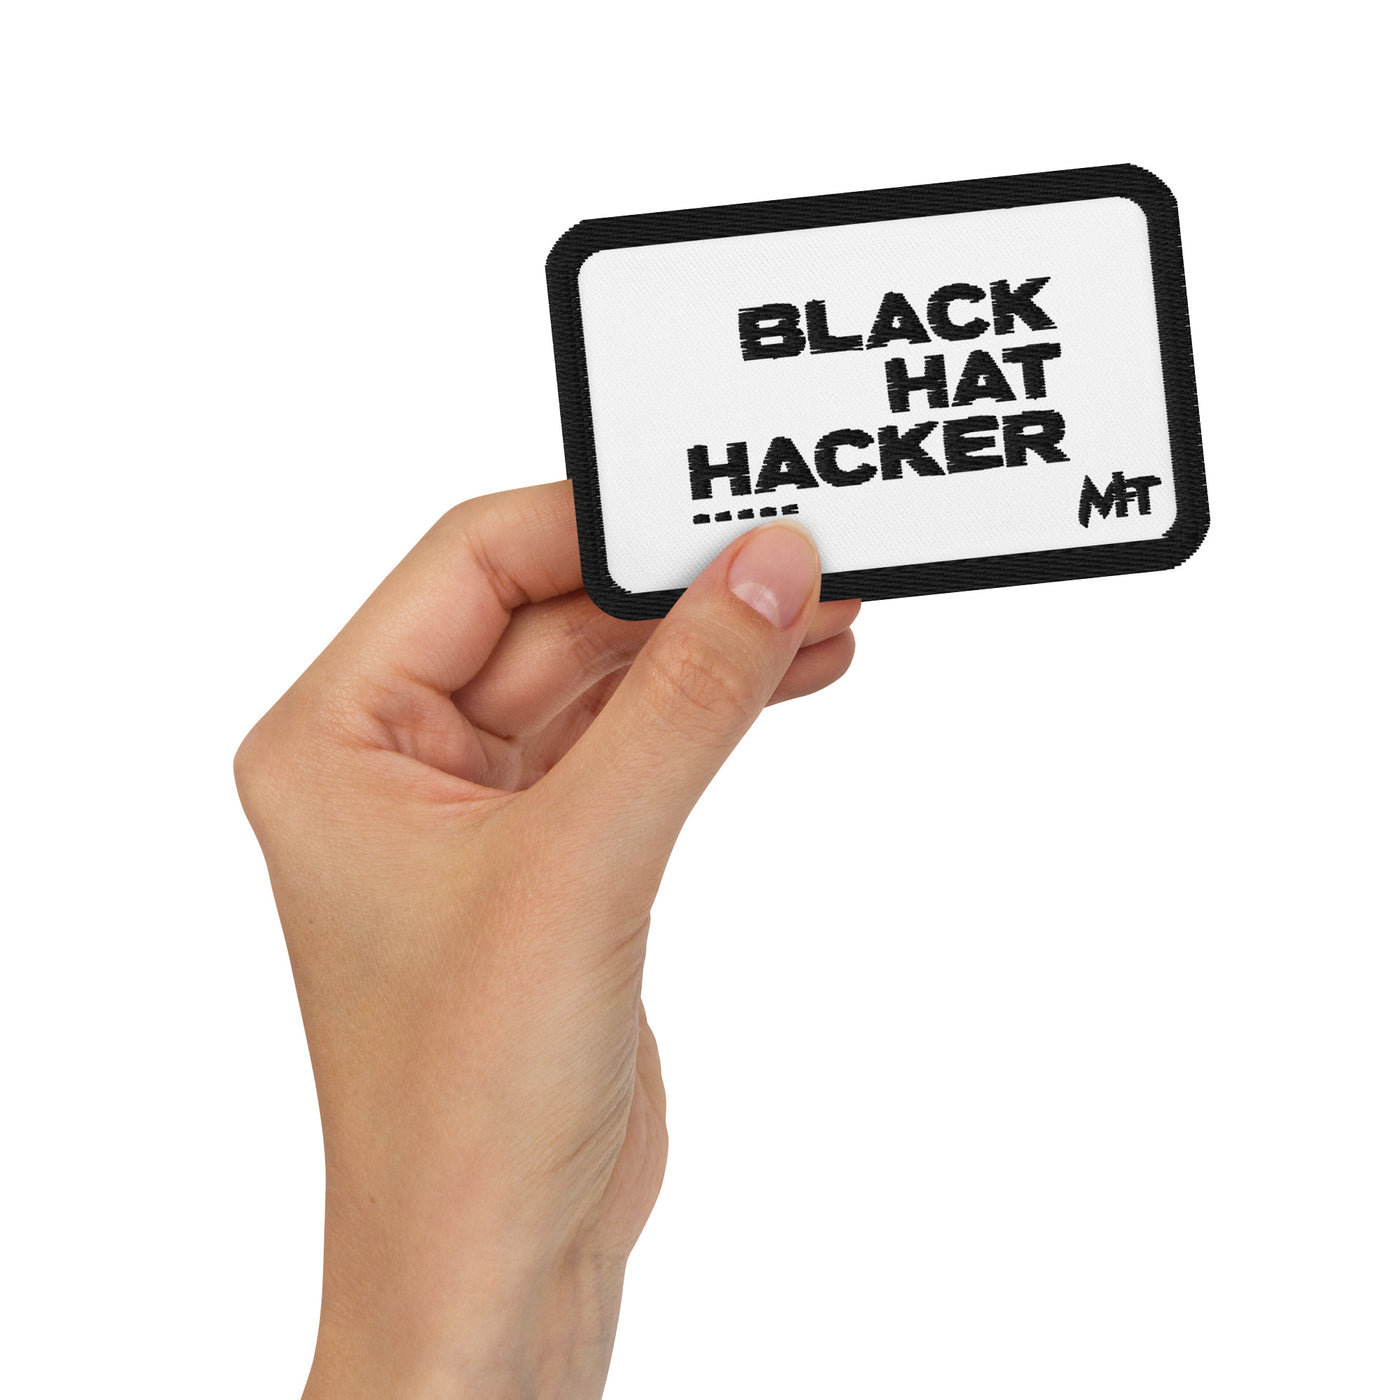 Black Hat Hacker V6 - Embroidered patches